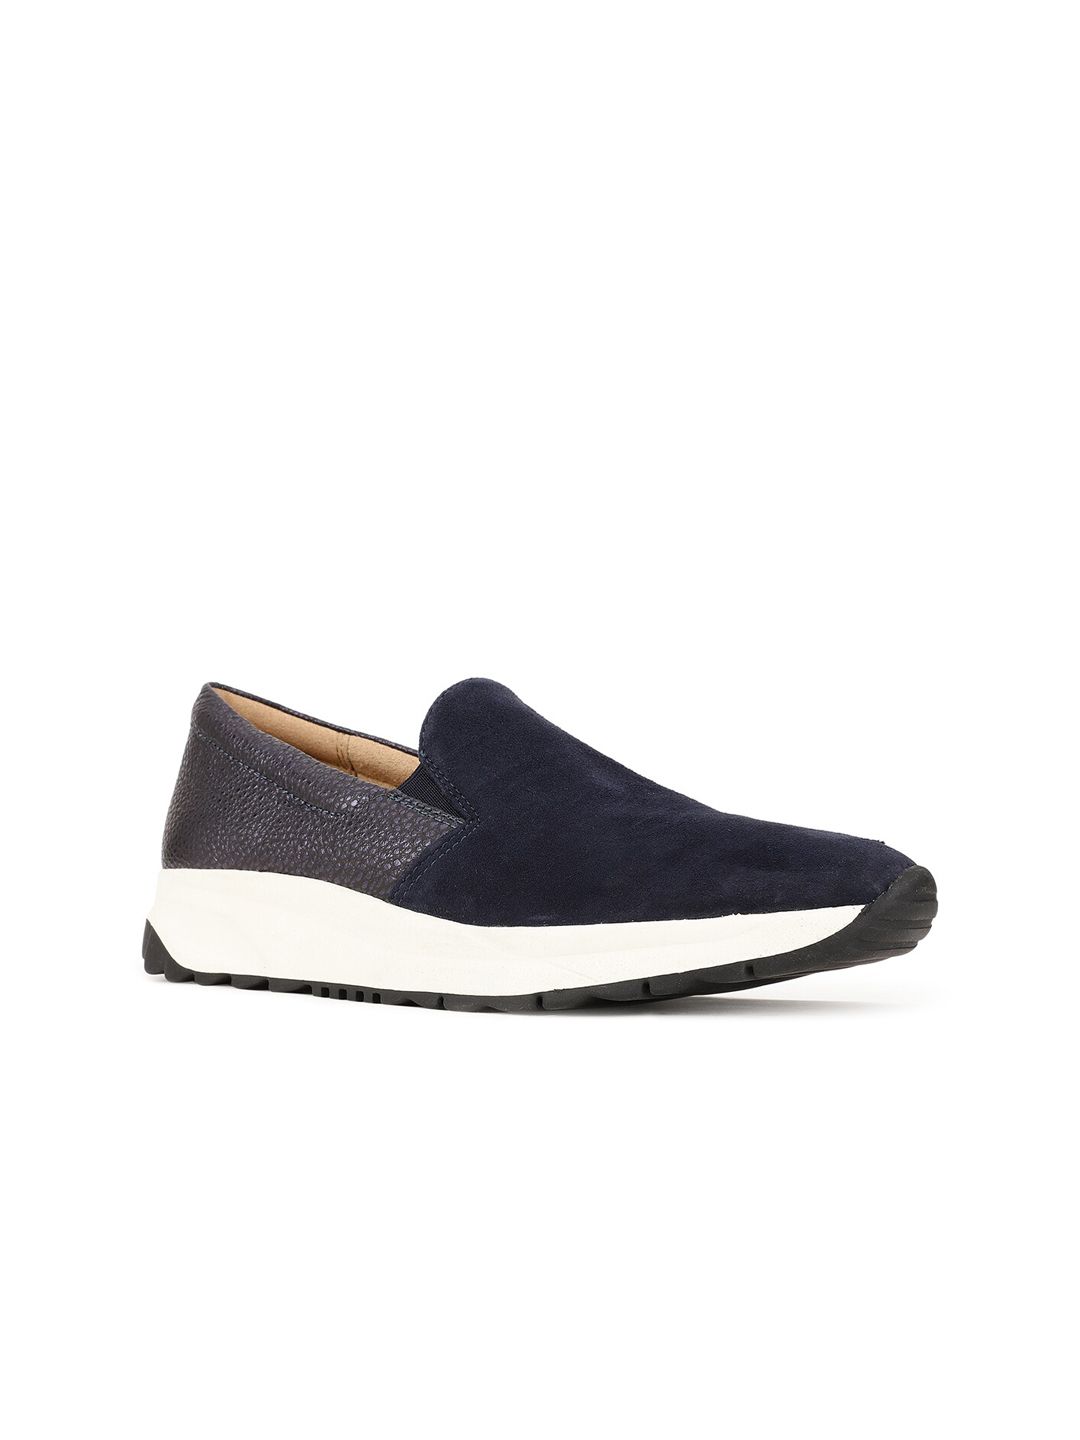 Naturalizer Women Blue Textured Slip-On Sneakers Price in India